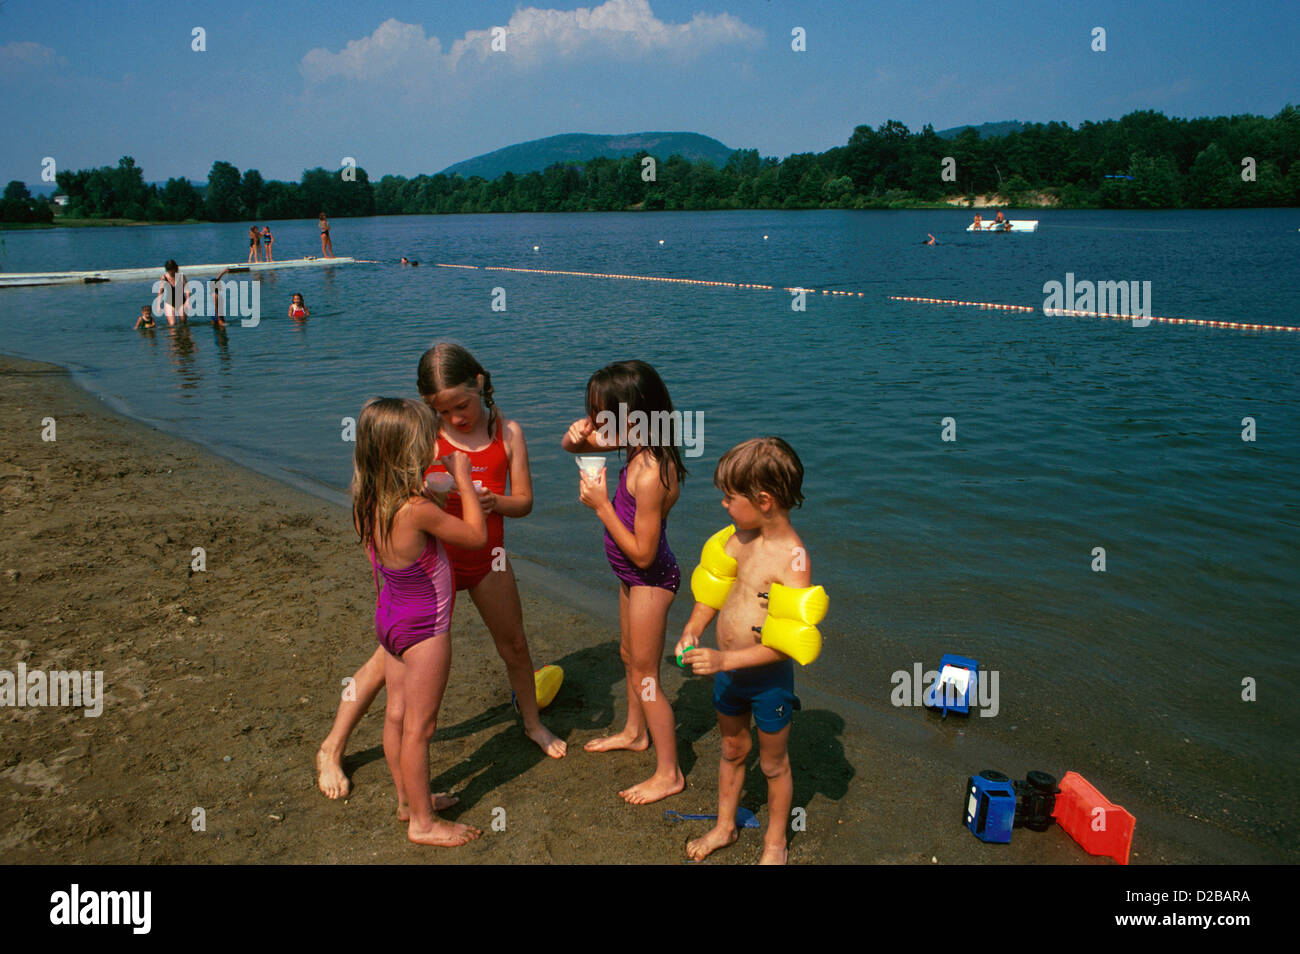 Four Children On The Beach, Boys And Girls, Flotation Arm Bands Stock Photo